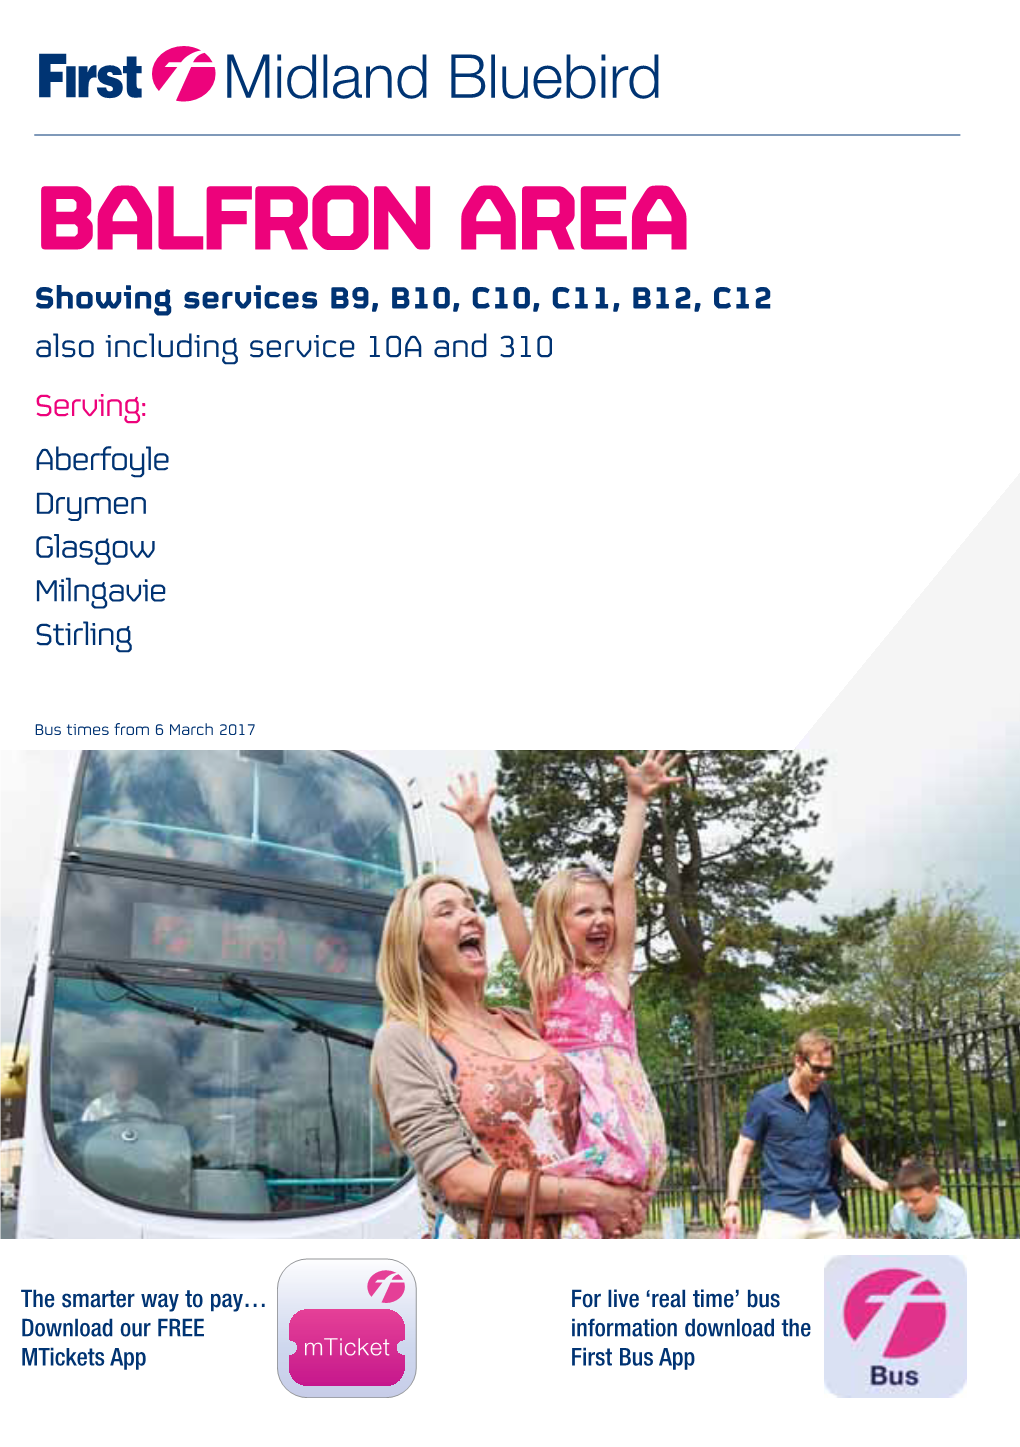 BALFRON AREA Showing Services B9, B10, C10, C11, B12, C12 Also Including Service 10A and 310 Serving: Aberfoyle Drymen Glasgow Milngavie Stirling